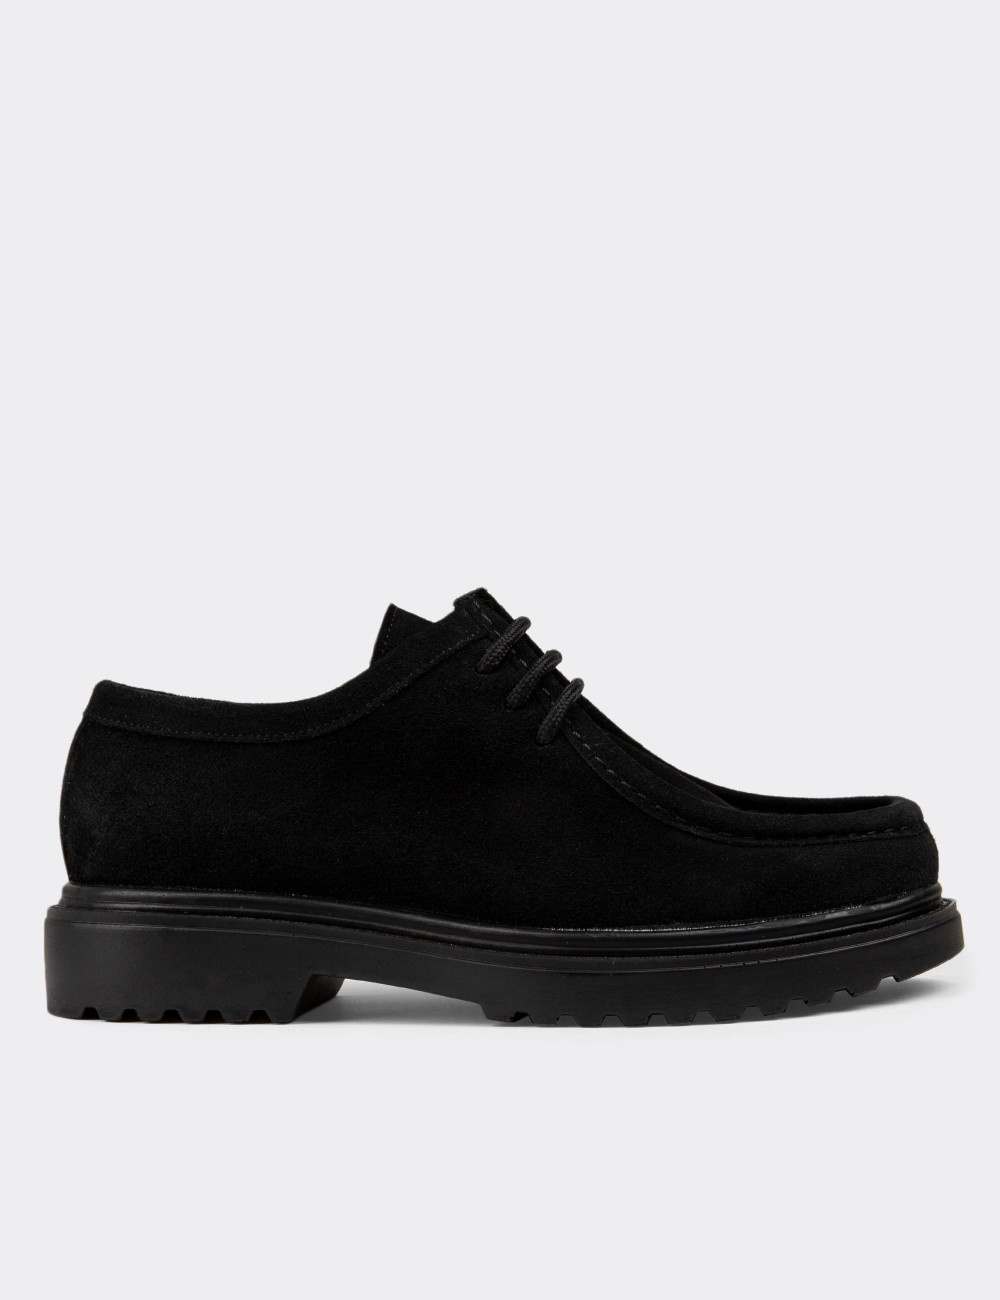 Black Suede Leather Lace-up Shoes 01430ZSYHE05 - Deery